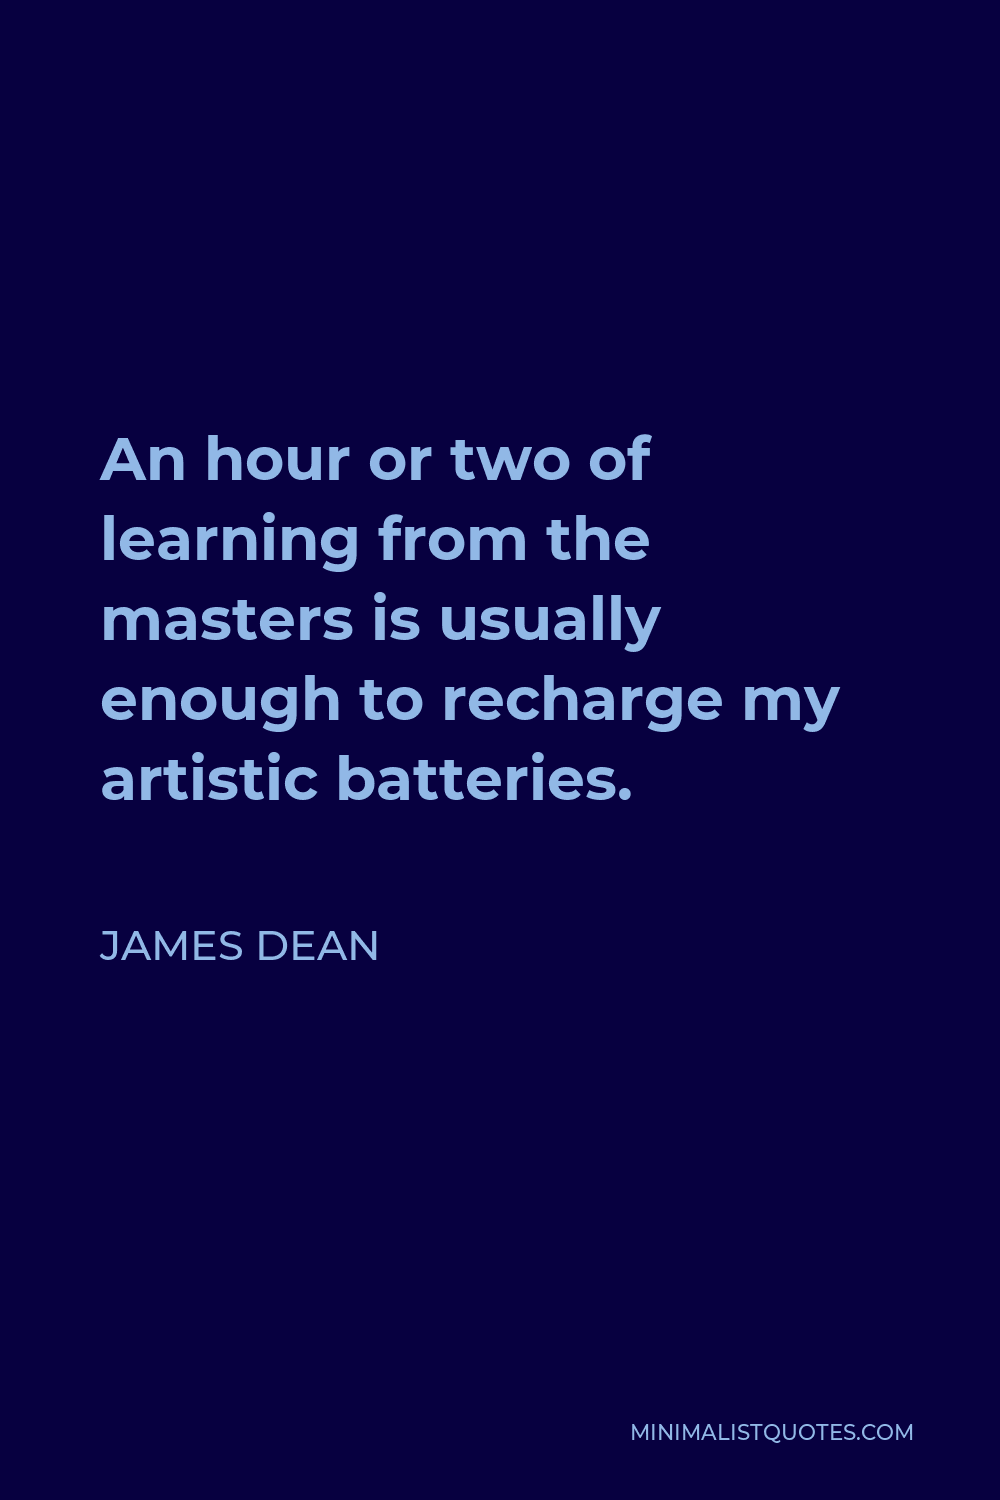 James Dean Quote - An hour or two of learning from the masters is usually enough to recharge my artistic batteries.